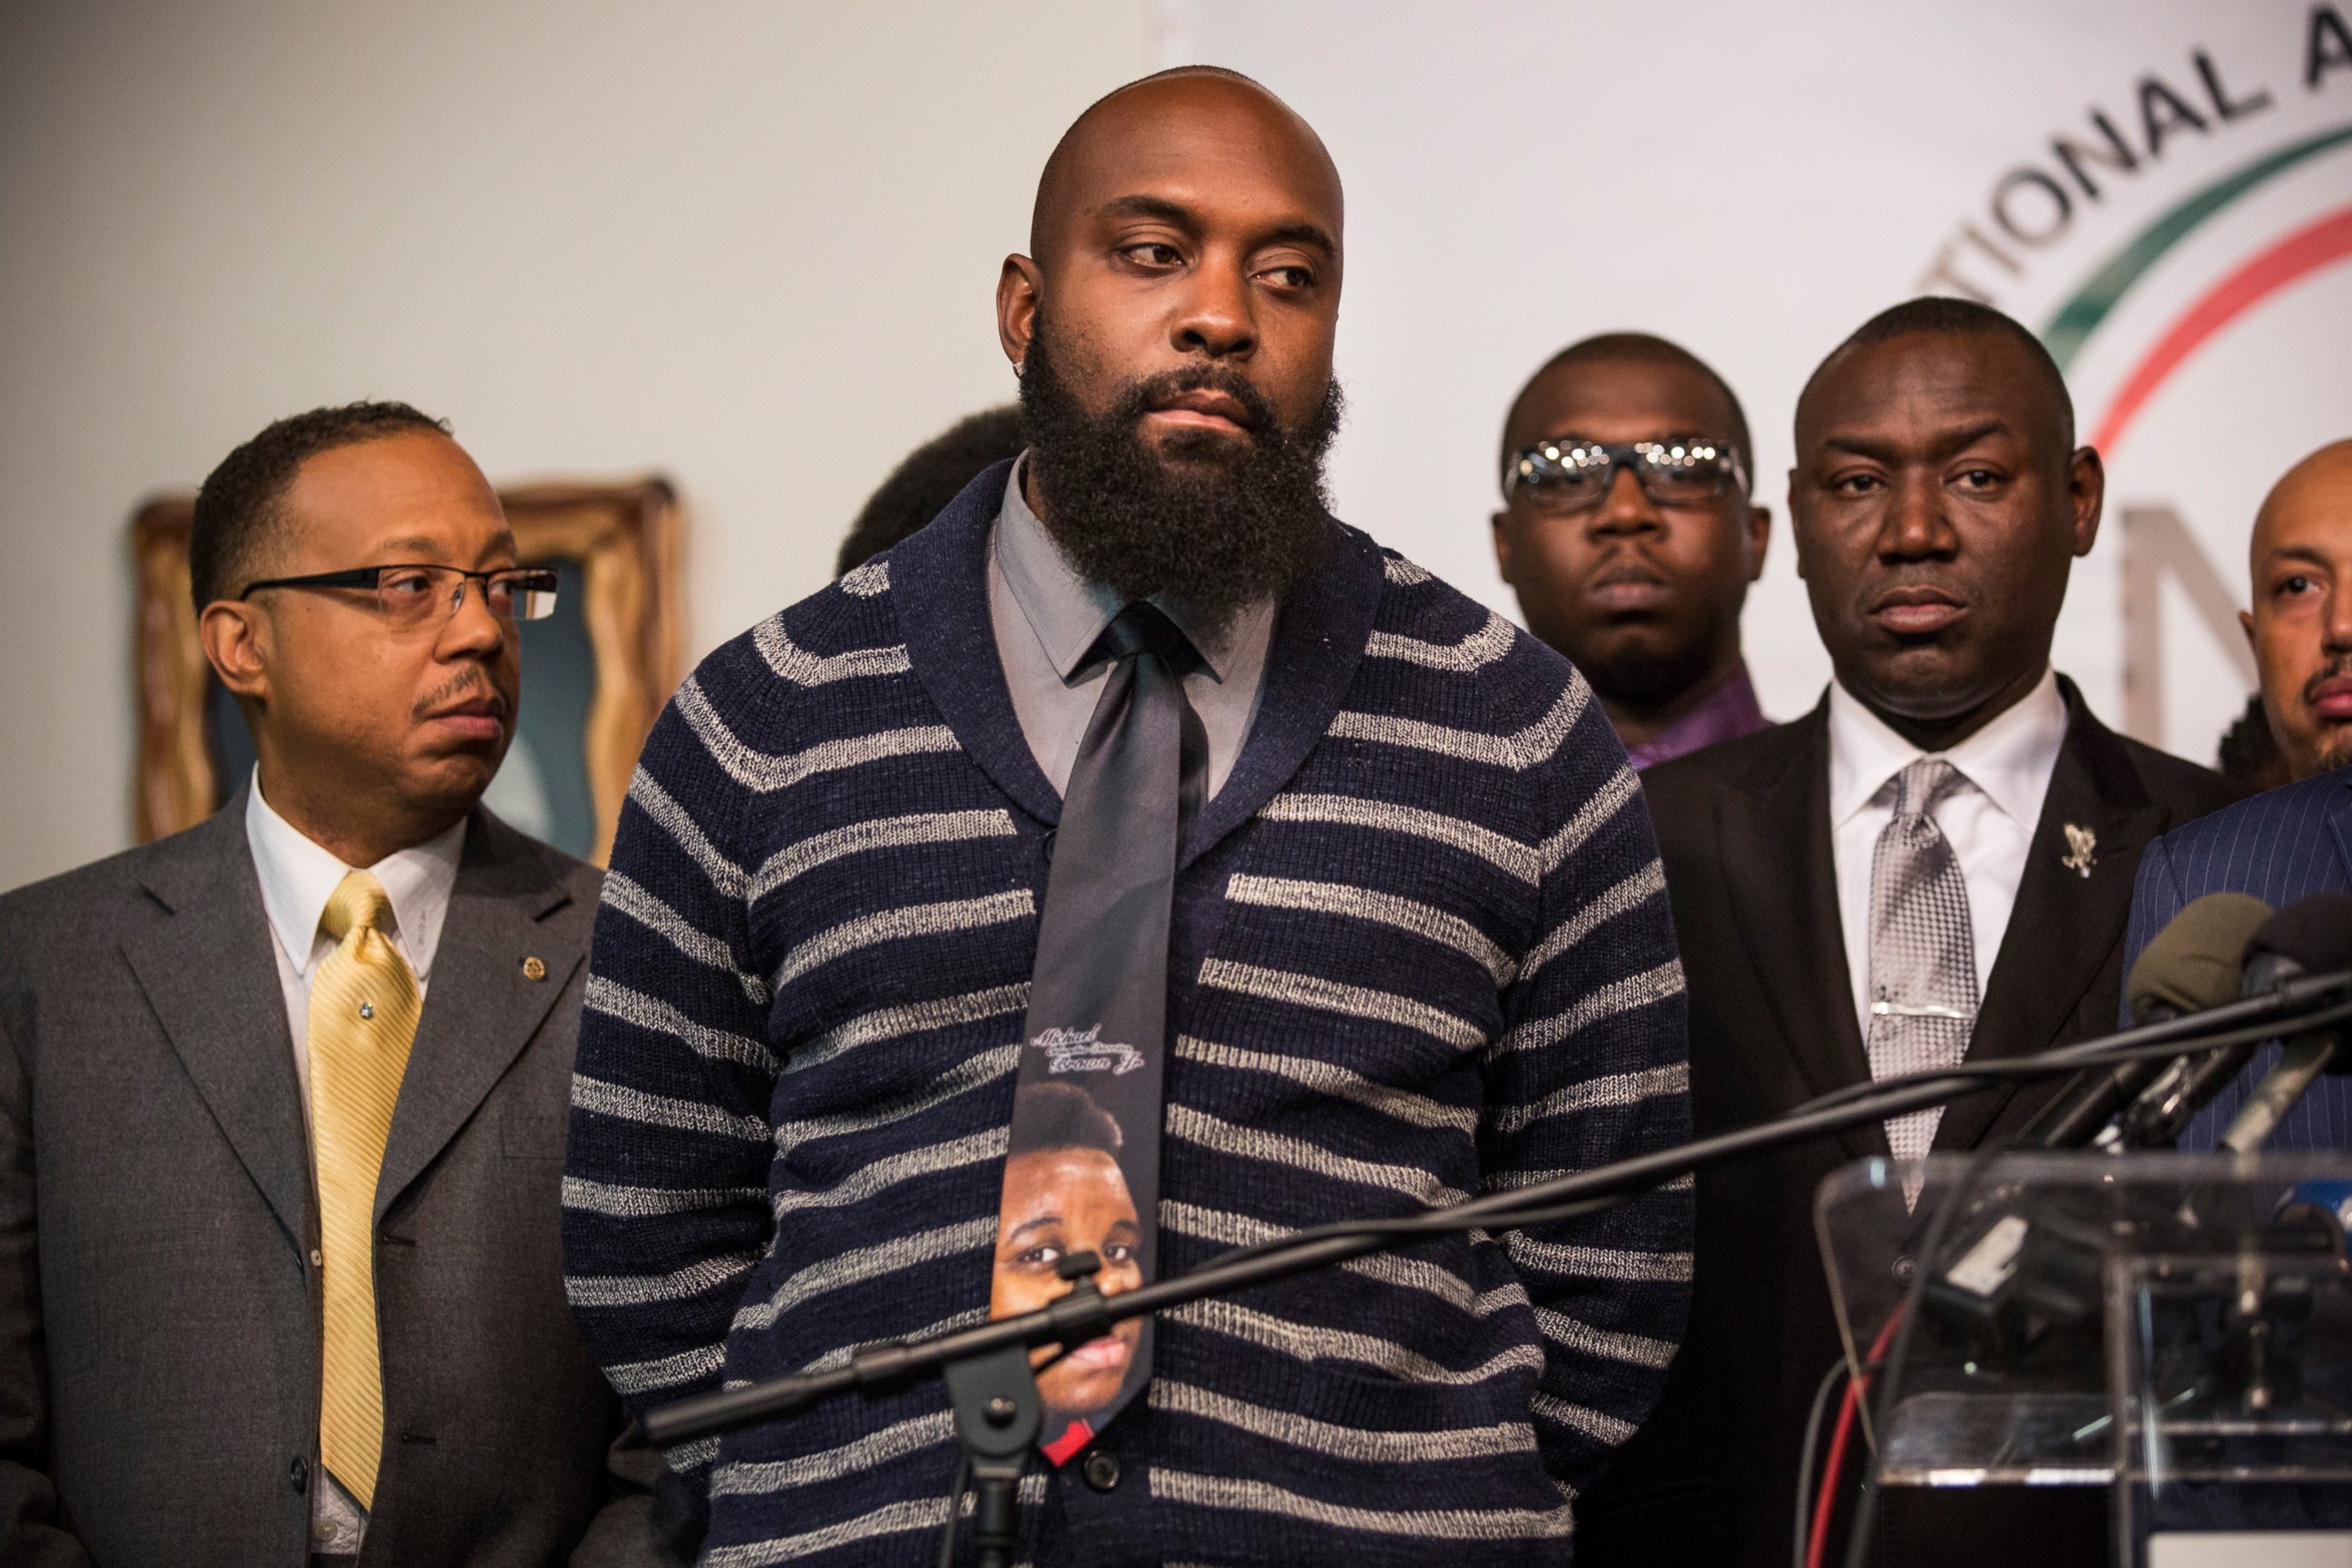 PHOTO: Michael Brown Sr, father of Michael Brown Jr, at a press conference on the eve of Thanksgiving to pray and address the events of the last few days regarding the grand jury verdict of police officer Darren Wilson on Nov. 26, 2014 in New York City.